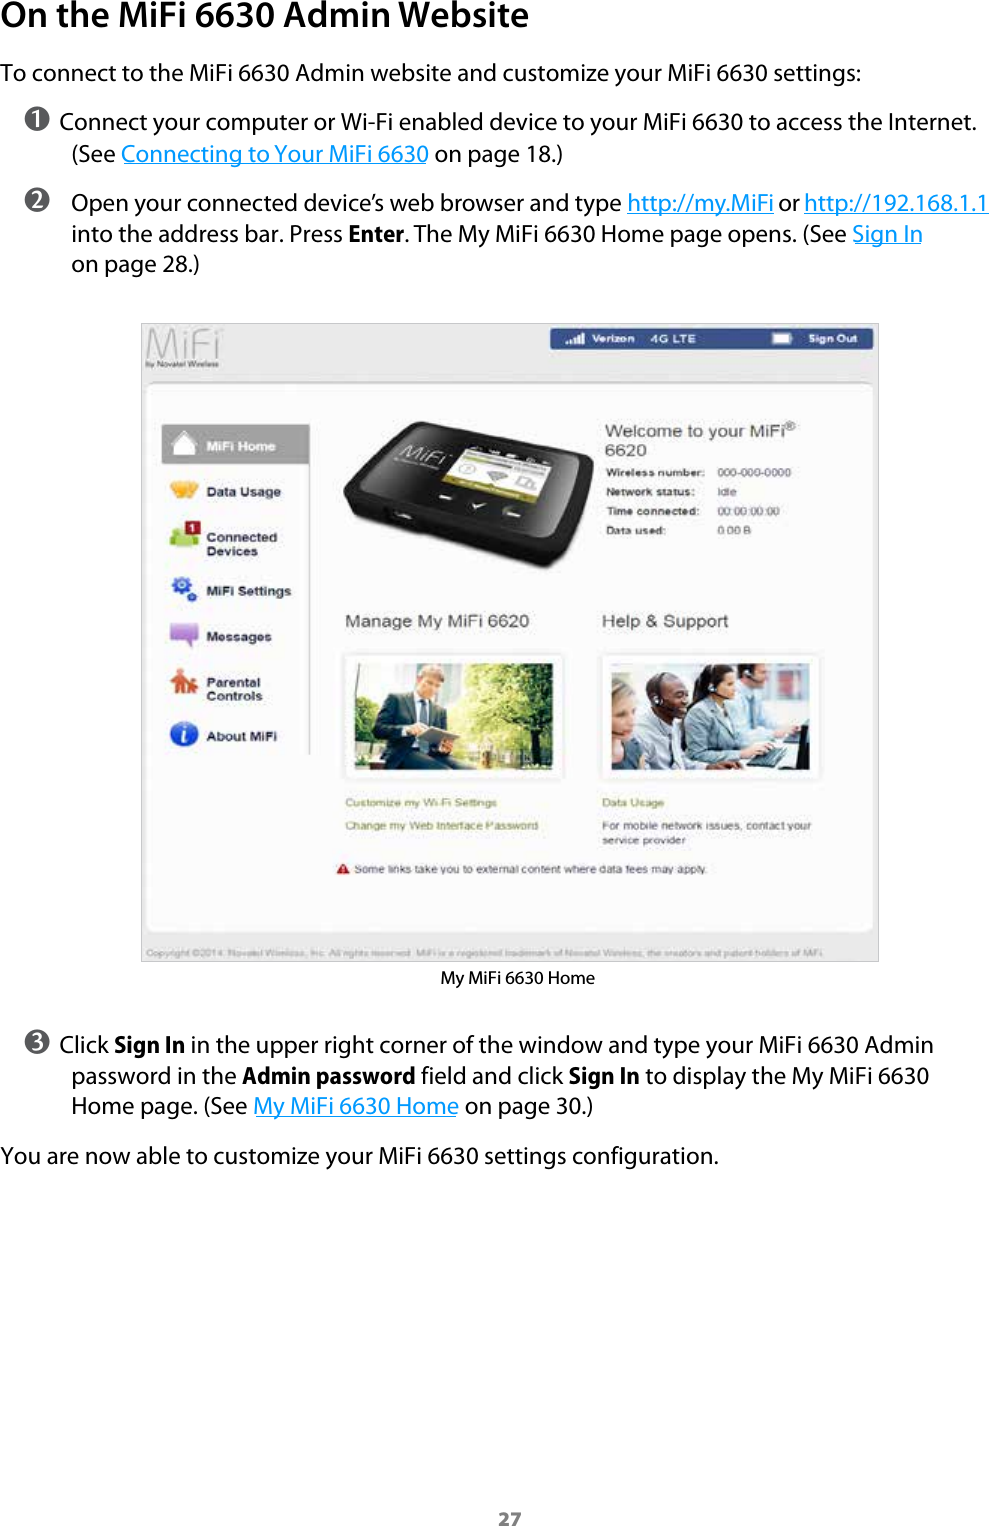 27On the MiFi 6630 Admin WebsiteTo connect to the MiFi 6630 Admin website and customize your MiFi 6630 settings:➊ Connect your computer or Wi-Fi enabled device to your MiFi 6630 to access the Internet. (See Connecting to Your MiFi 6630 on page 18.) ➋ Open your connected device’s web browser and type http://my.MiFi or http://192.168.1.1 into the address bar. Press Enter. The My MiFi 6630 Home page opens. (See Sign In on page 28.)My MiFi 6630 Home➌ Click Sign In in the upper right corner of the window and type your MiFi 6630 Admin password in the Admin password field and click Sign In to display the My MiFi 6630 Home page. (See My MiFi 6630 Home on page 30.)You are now able to customize your MiFi 6630 settings configuration.